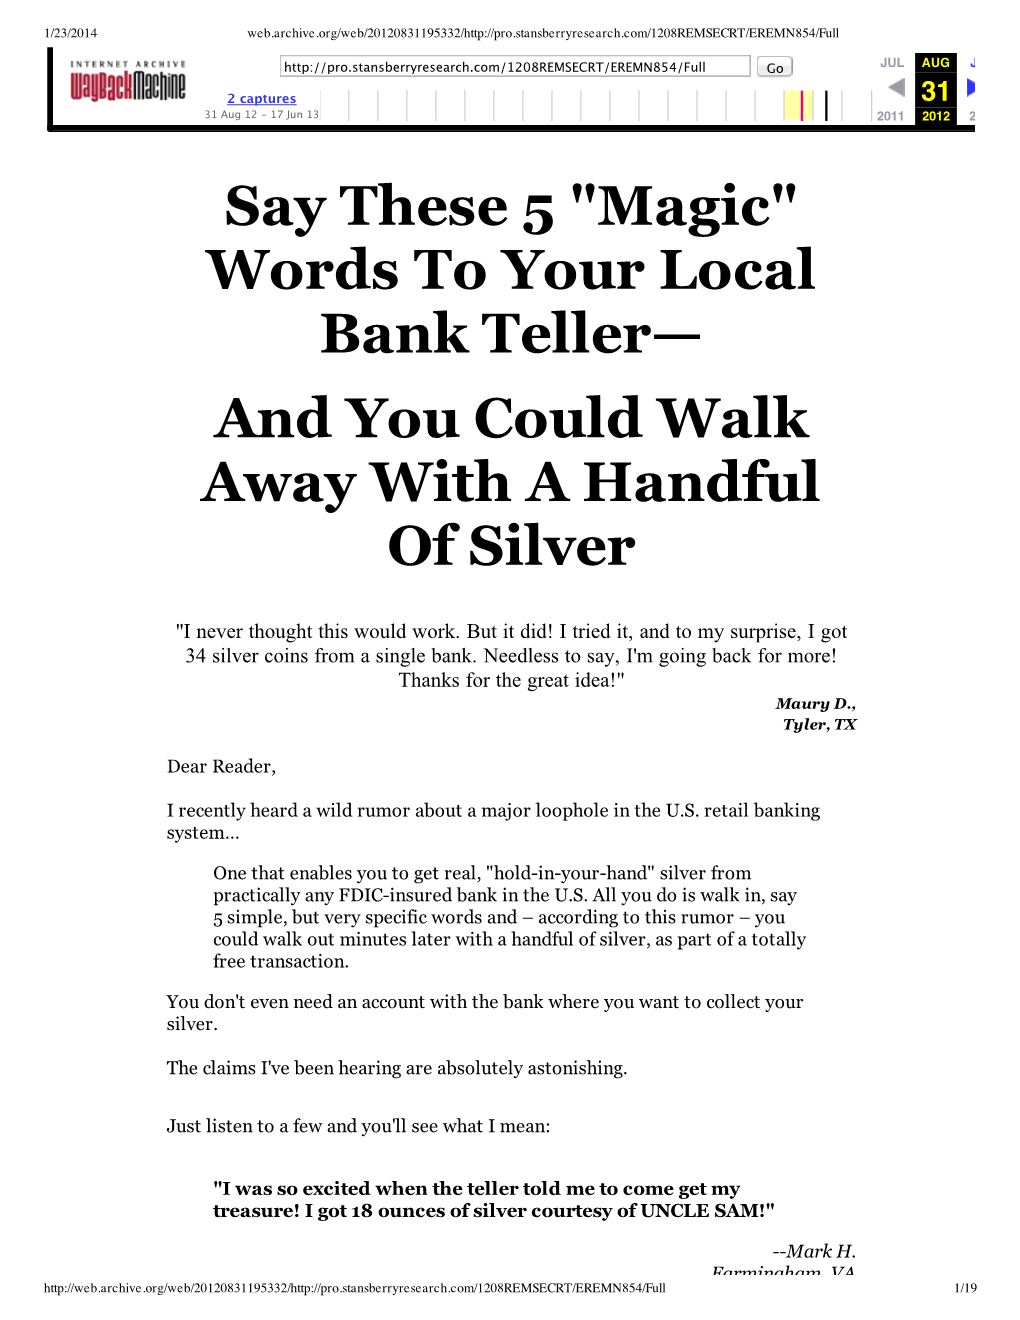 "Magic" Words to Your Local Bank Teller— and You Could Walk Away with a Handful of Silver